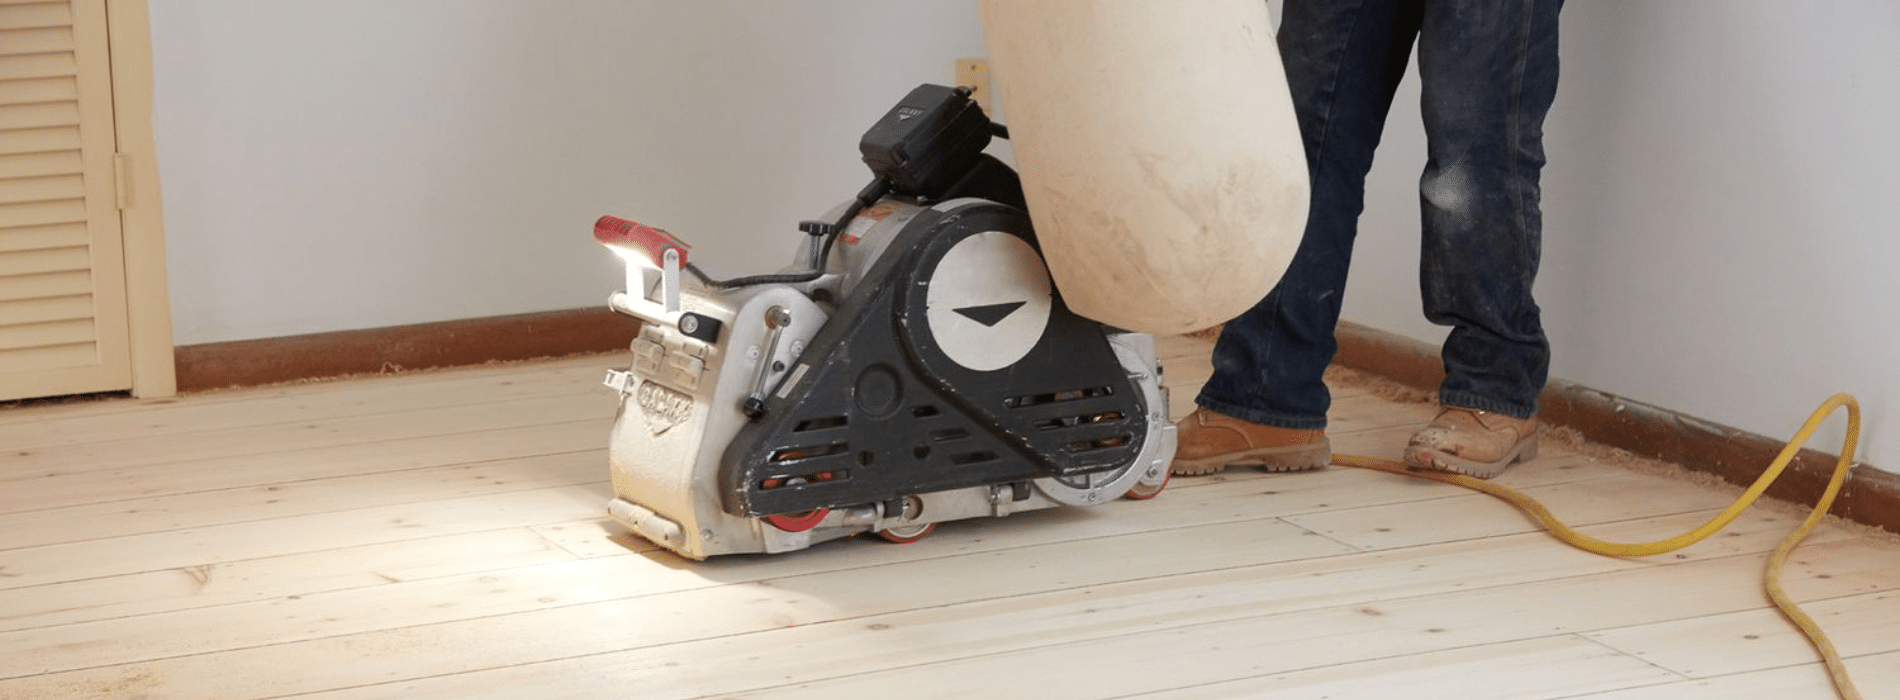 Mr Sander® use a Bona Scorpion, a powerful 200mm drum sander, to sand parquet floors in Balham, SW12. With a 1.5 kW effect, 240V voltage, and 50Hz frequency, it delivers efficient results. The dust extraction system, equipped with a HEPA filter, ensures a clean environment throughout the process. 